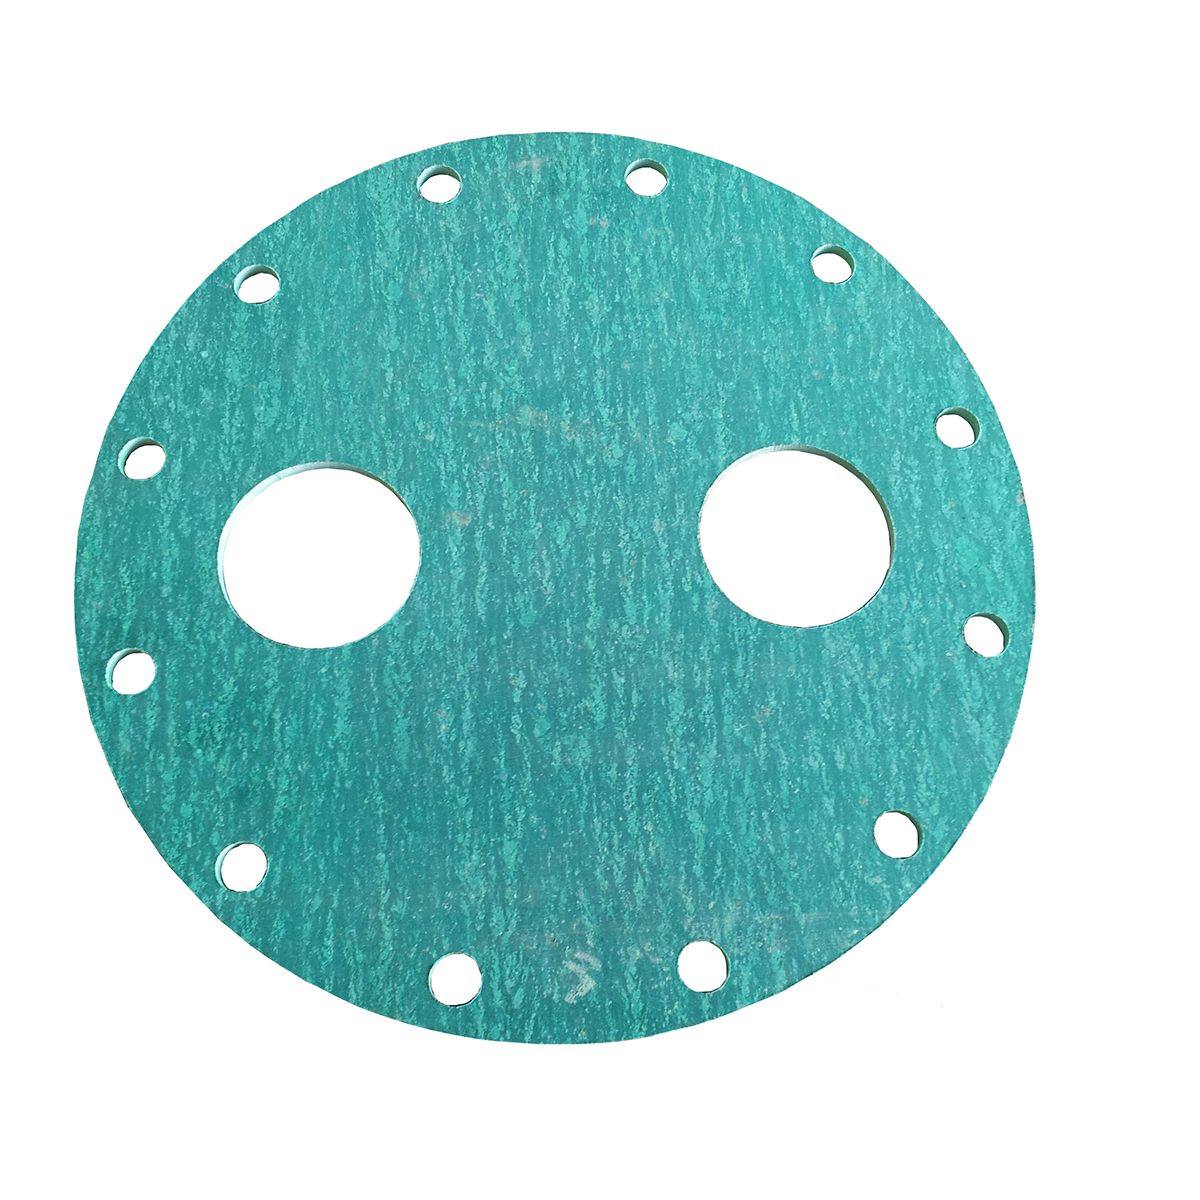 Custom Gasket Made from Alapin Compressed Fibre Gasket Material.